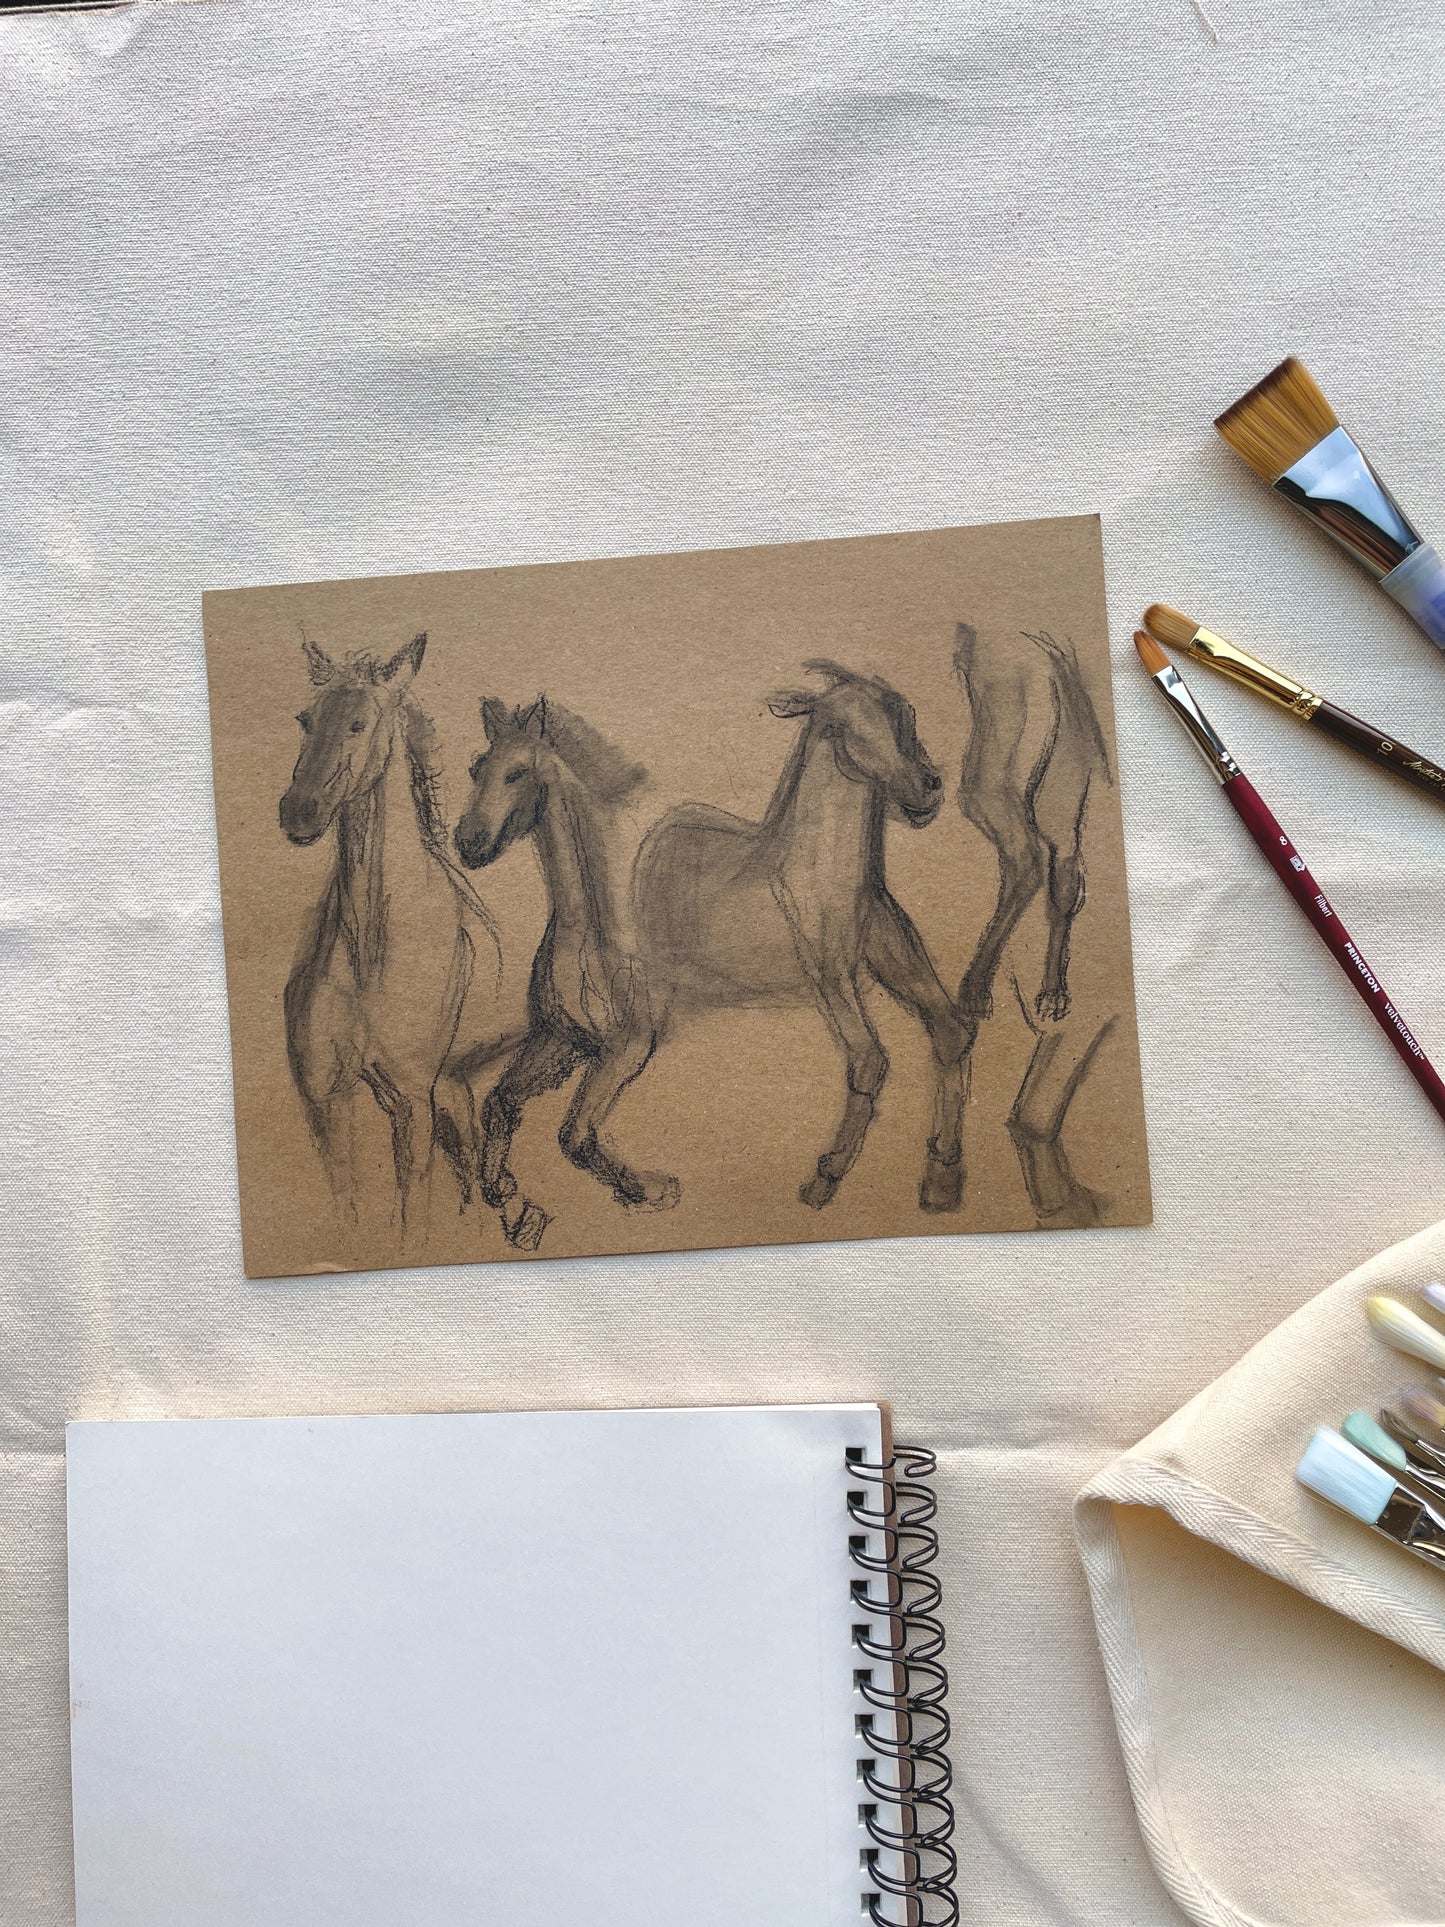 Pencil and charcoal drawing of horses in motion on natural paper